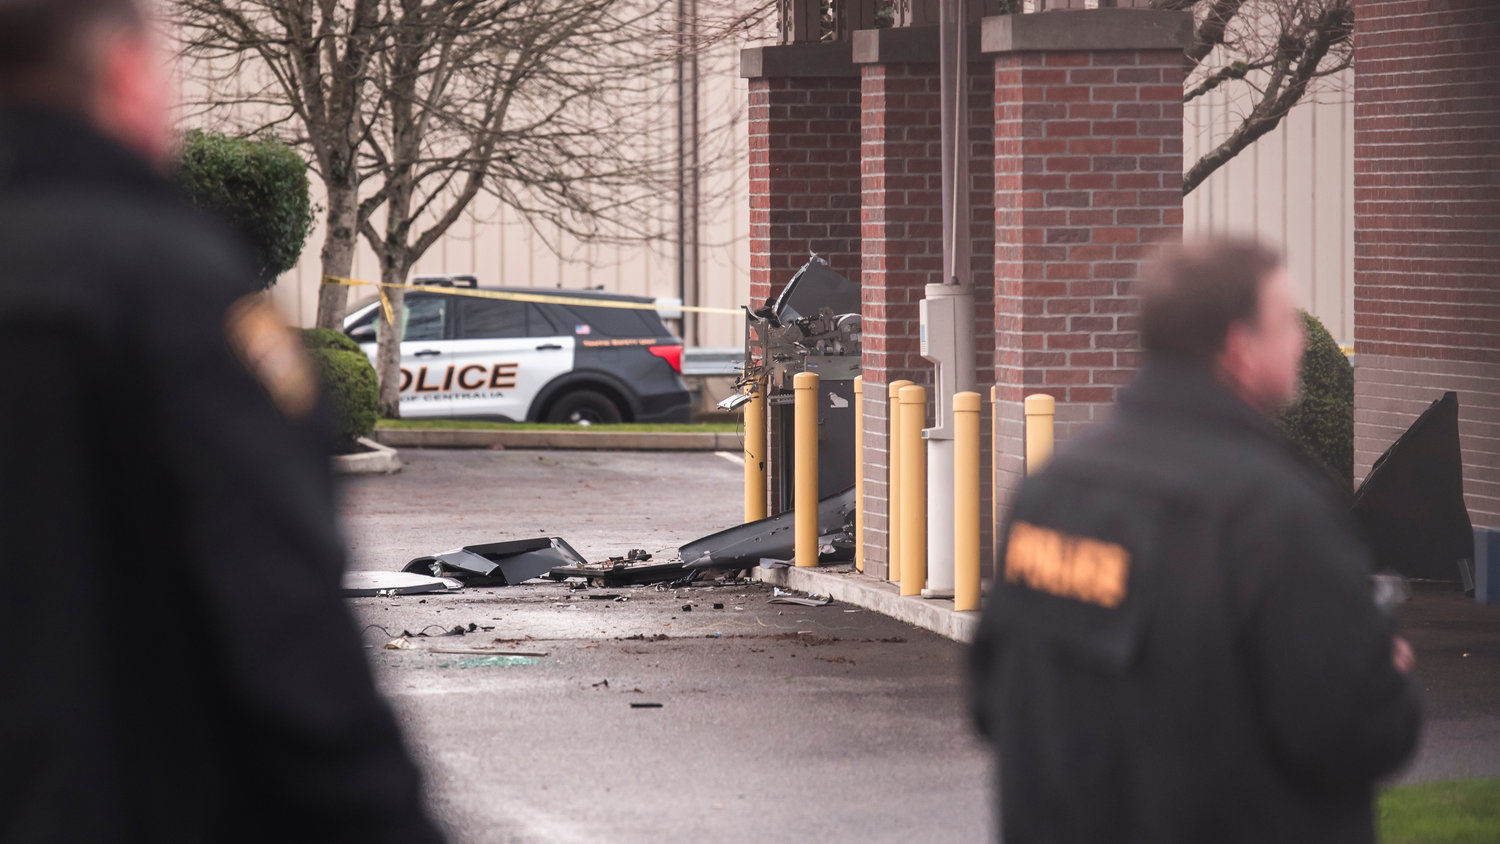 Debris is seen scattered in an area where an ATM once stood outside the 1st Security Bank in Centralia after reports of an explosion in the area last month.